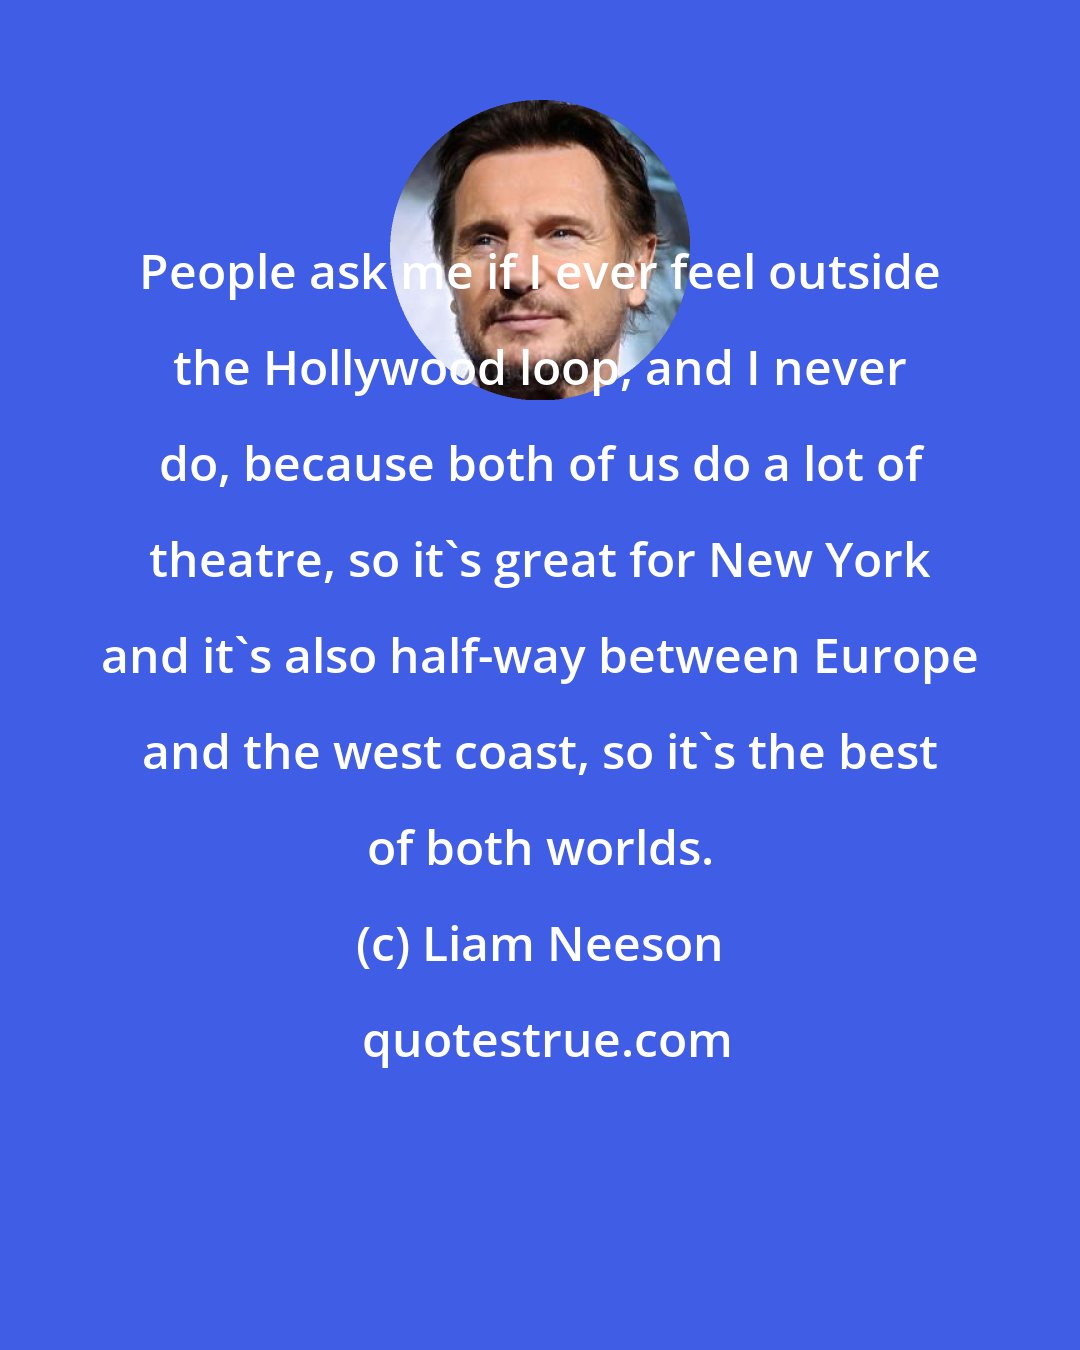 Liam Neeson: People ask me if I ever feel outside the Hollywood loop, and I never do, because both of us do a lot of theatre, so it's great for New York and it's also half-way between Europe and the west coast, so it's the best of both worlds.